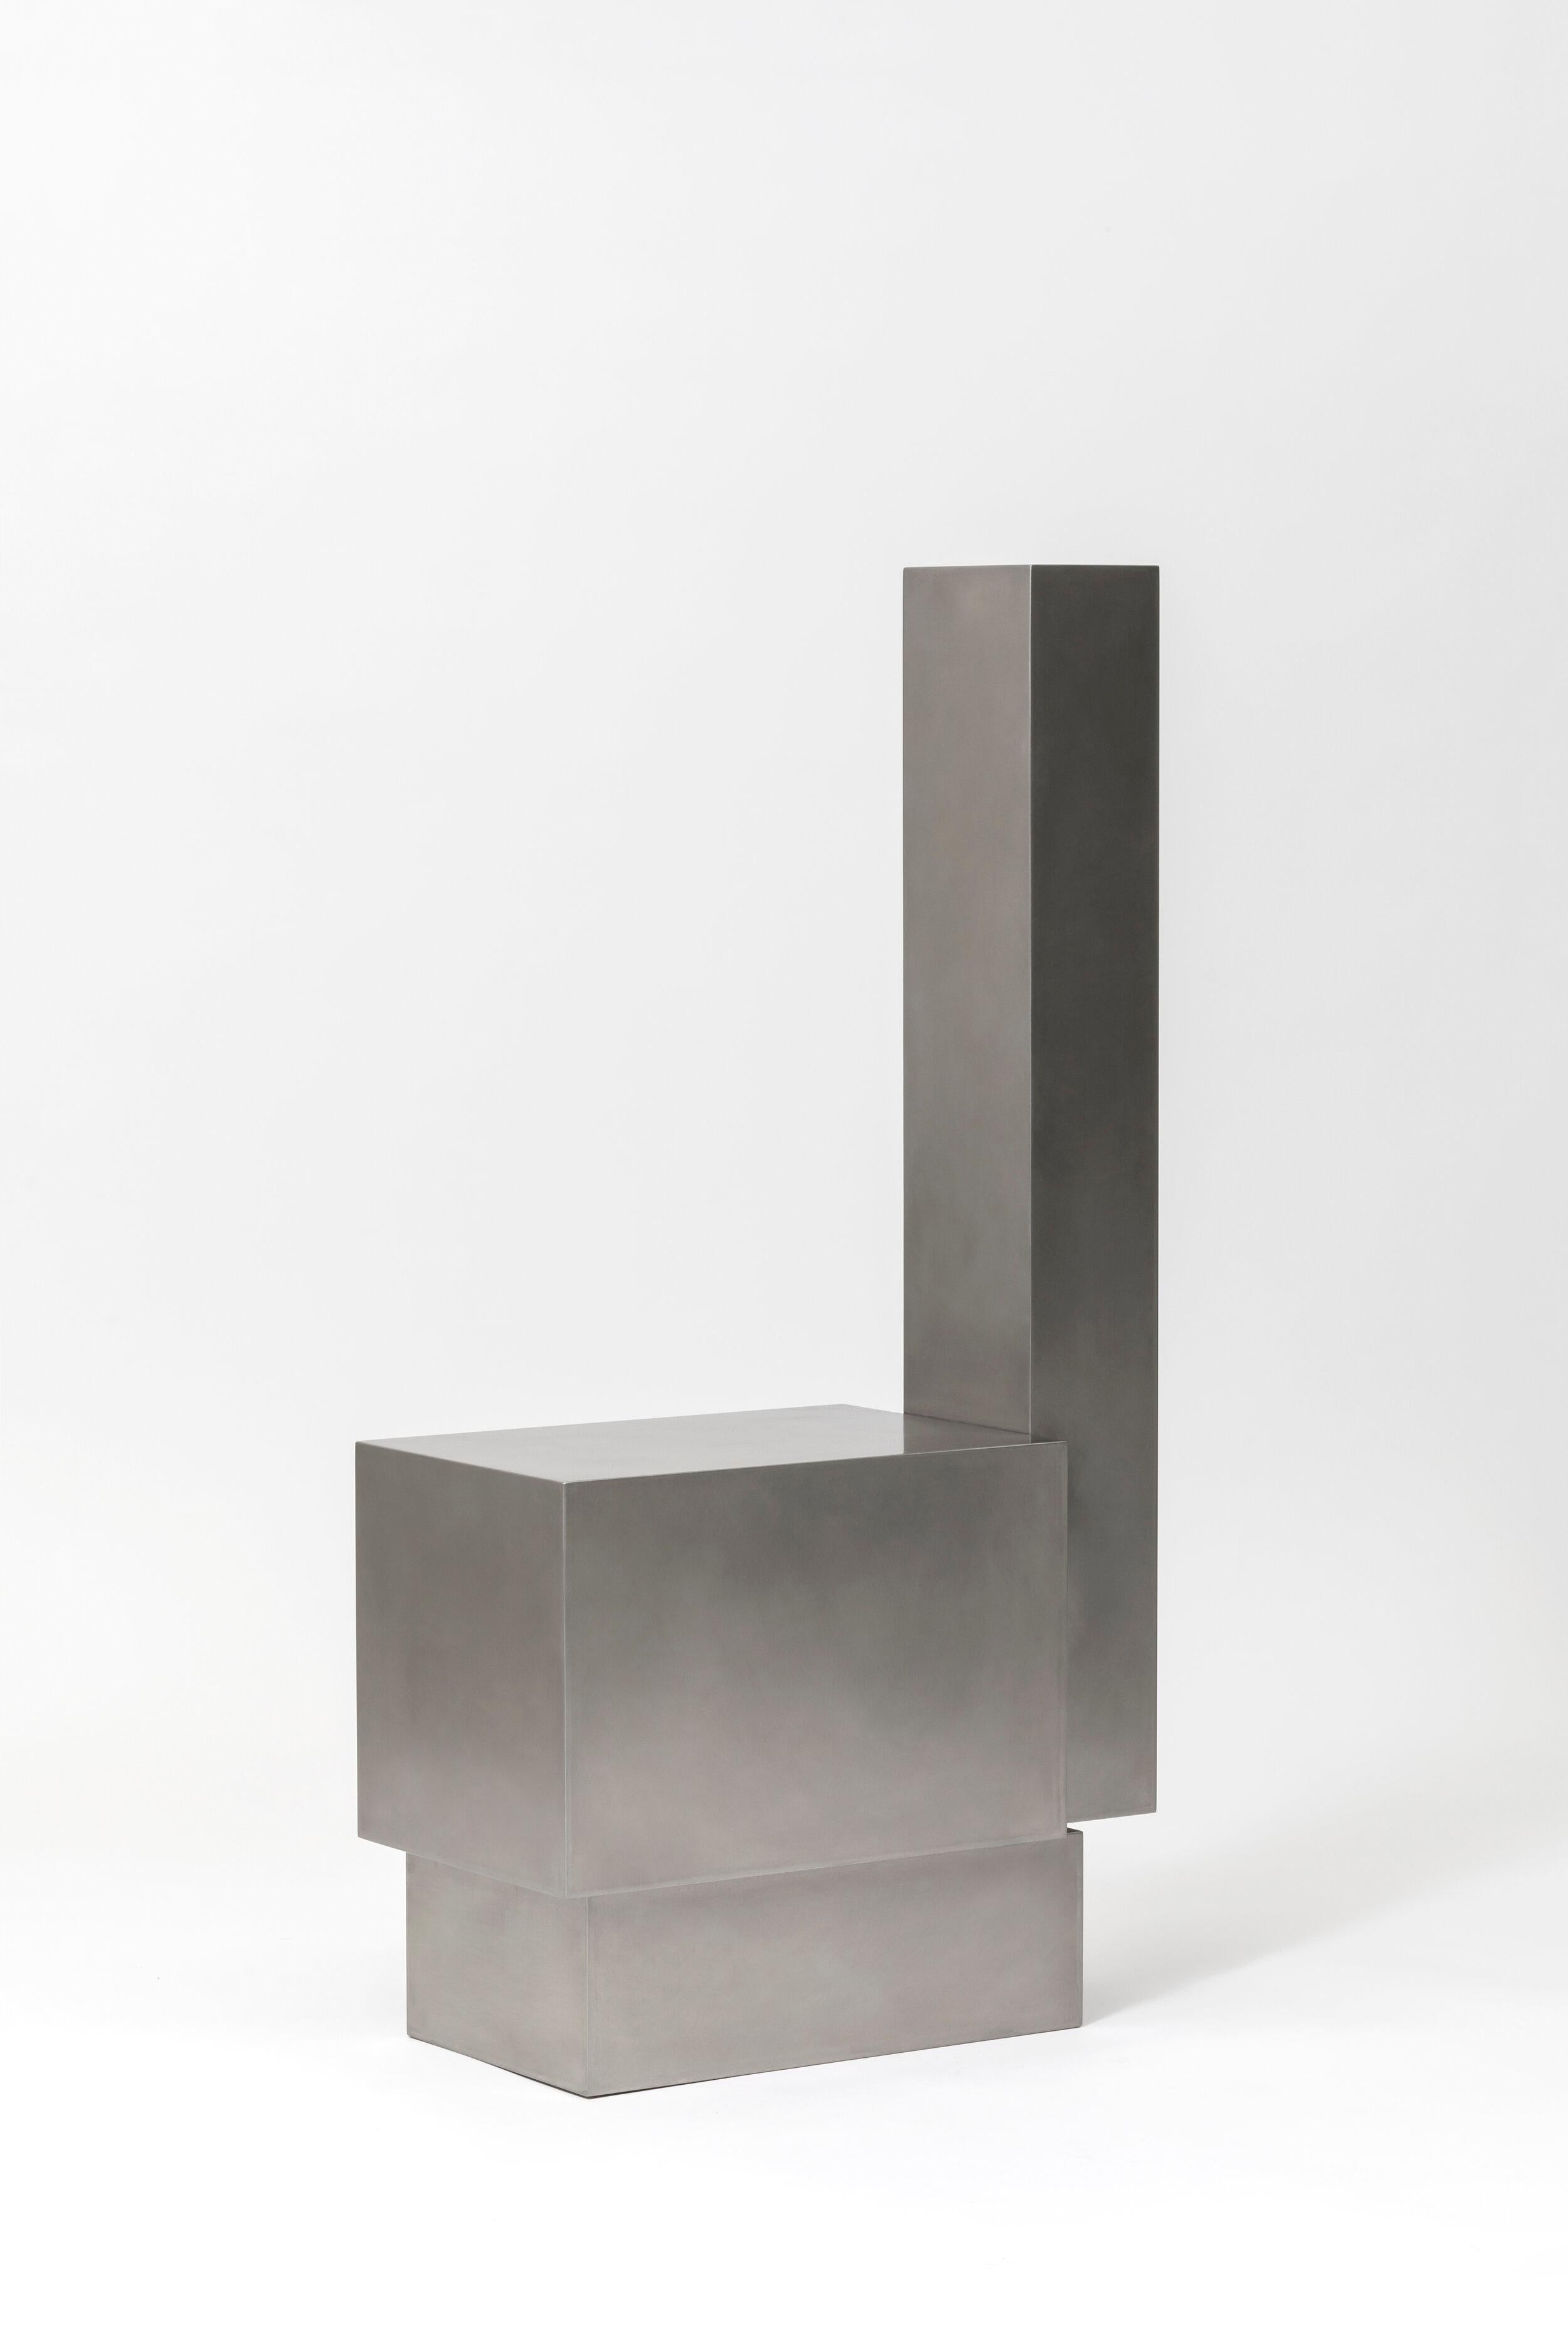 Layered steel seat XVII by Hyungshin Hwang
Dimensions: D 30 x W 51 x H 108 cm
Materials: stainless steel

Layered Series is the main theme and concept of work of Hwang, who continues his experiment which is based on architectural composition of